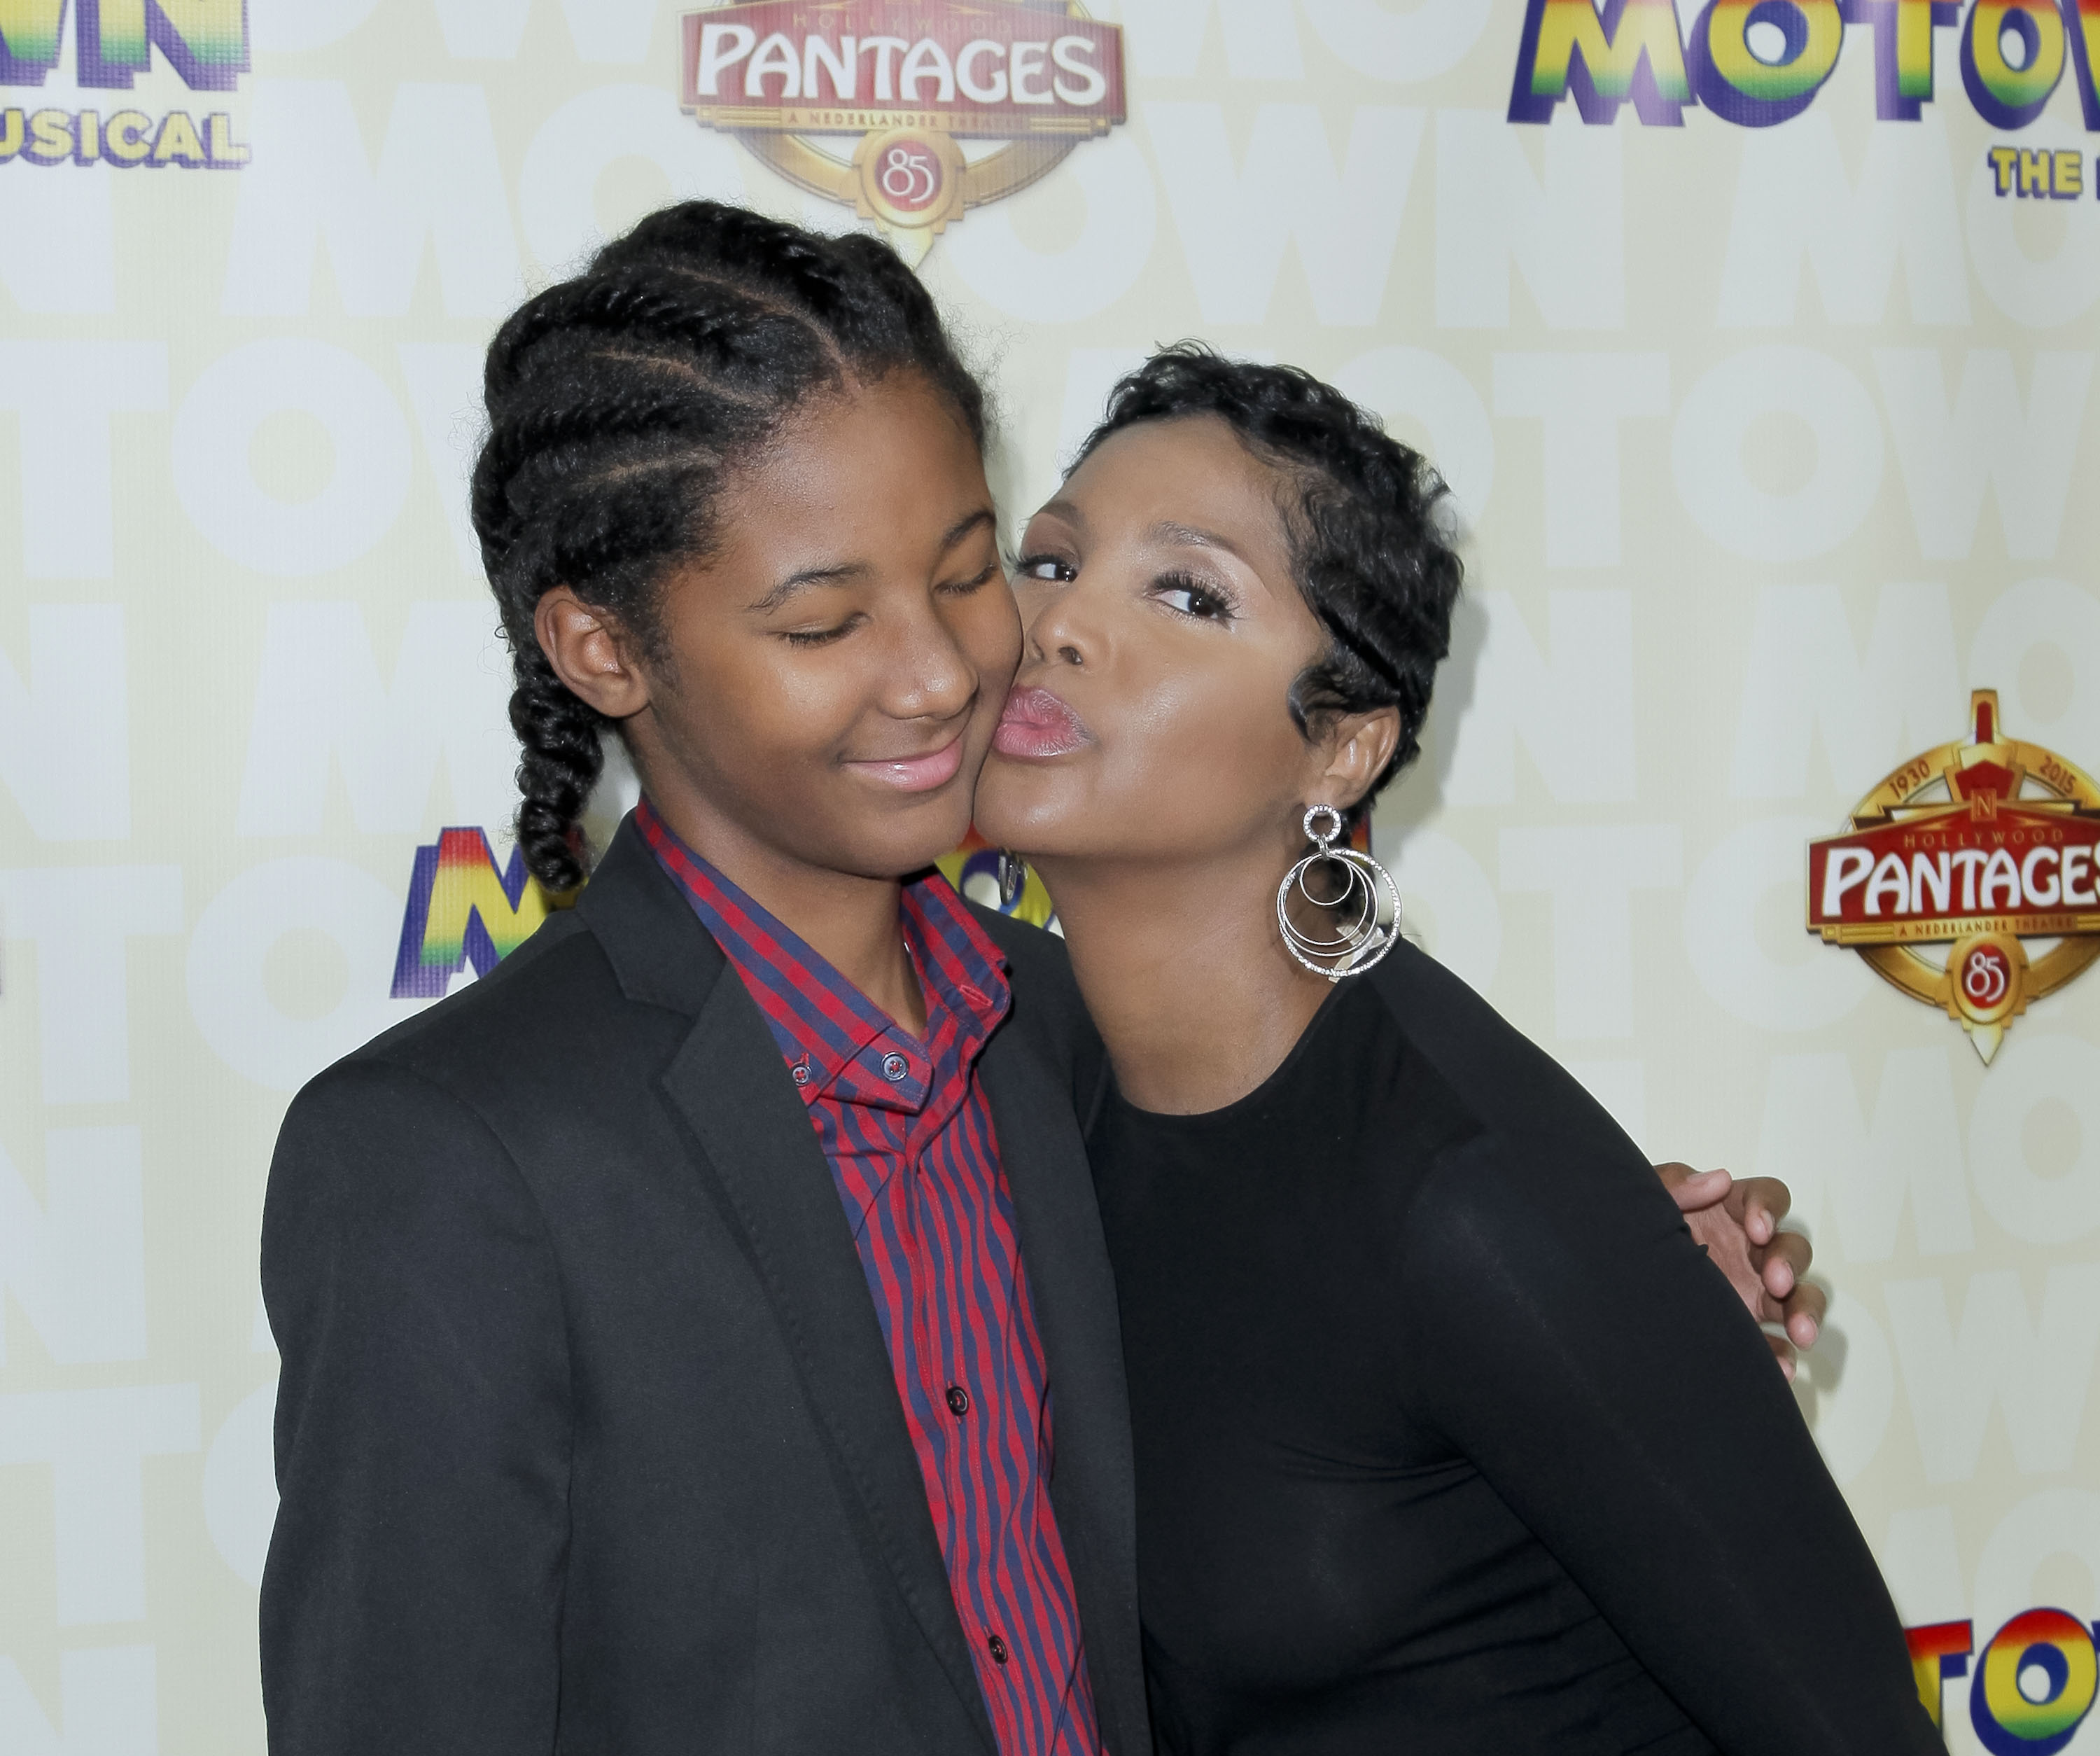 Diezel Ky Braxton-Lewis and Toni Braxton at the opening night of "Motown: The Musical" on April 30, 2015, in Hollywood, California | Source: Getty Images